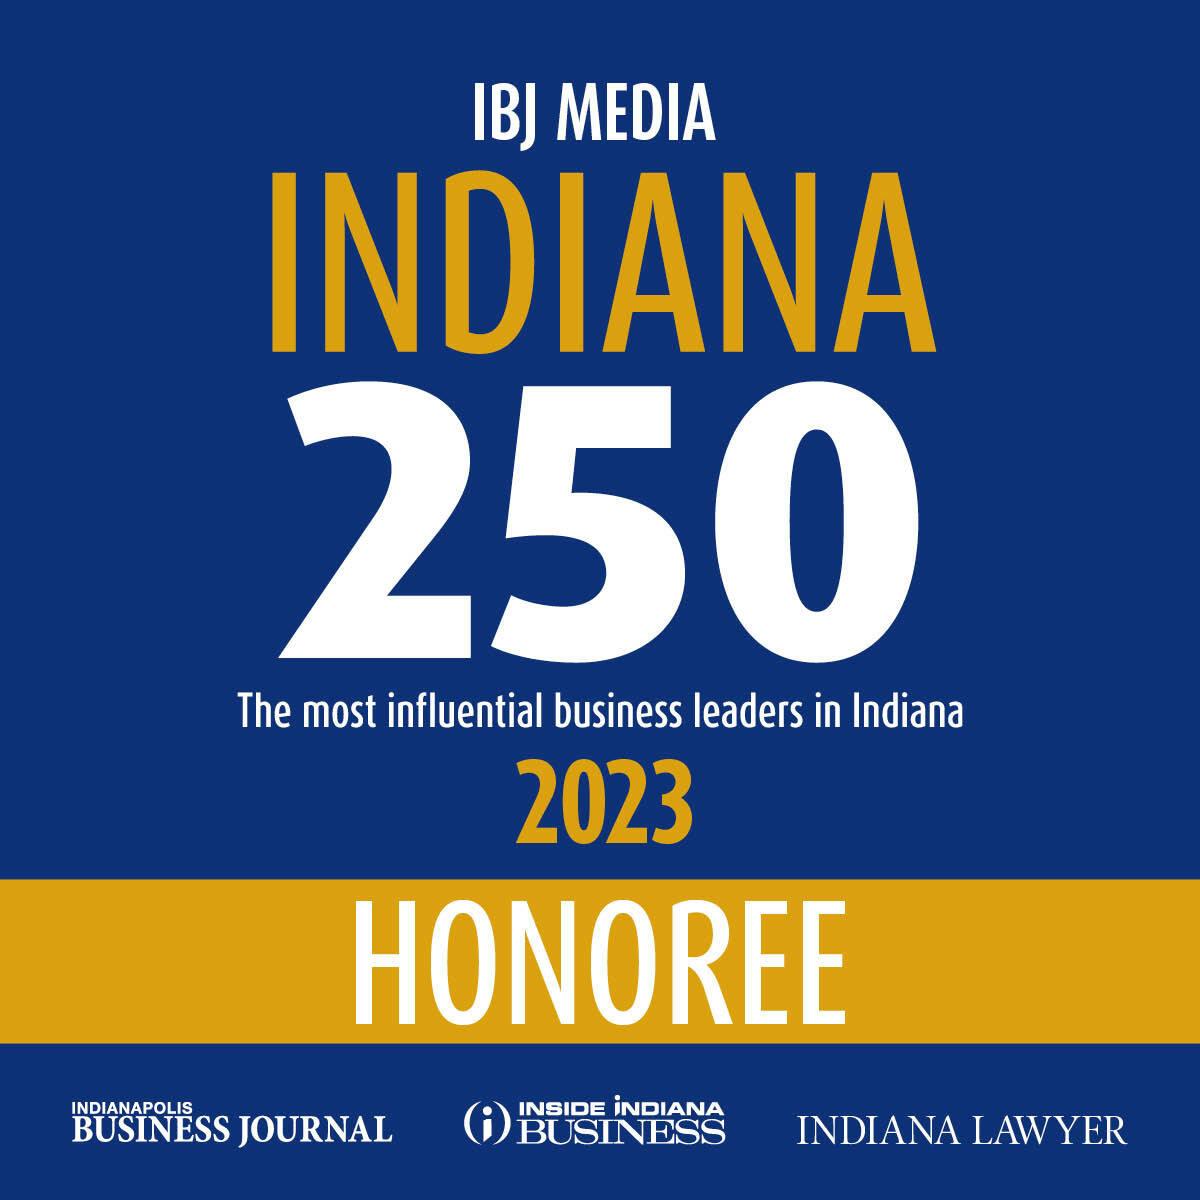 IBJ Media - Indiana 250 - The most influential business leaders in Indiana - 2023 Honoree